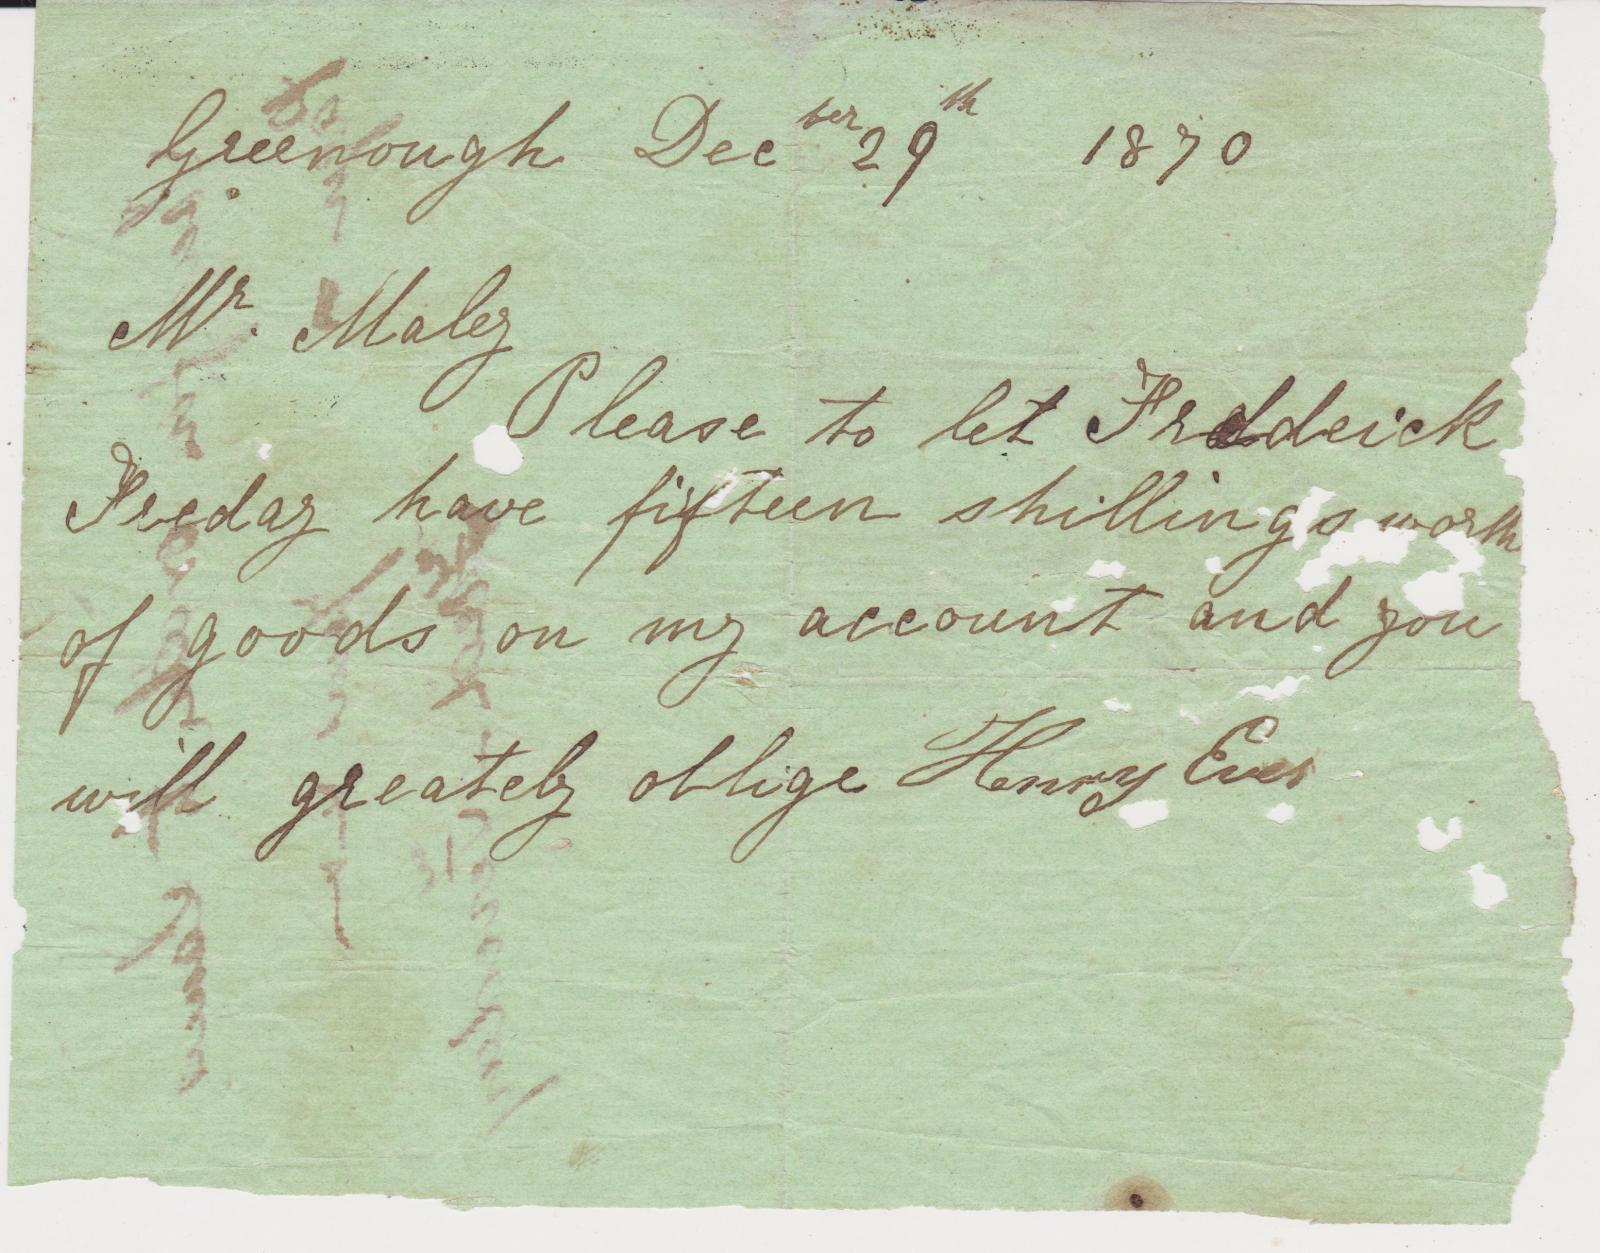 Promissory note from Henry Eves